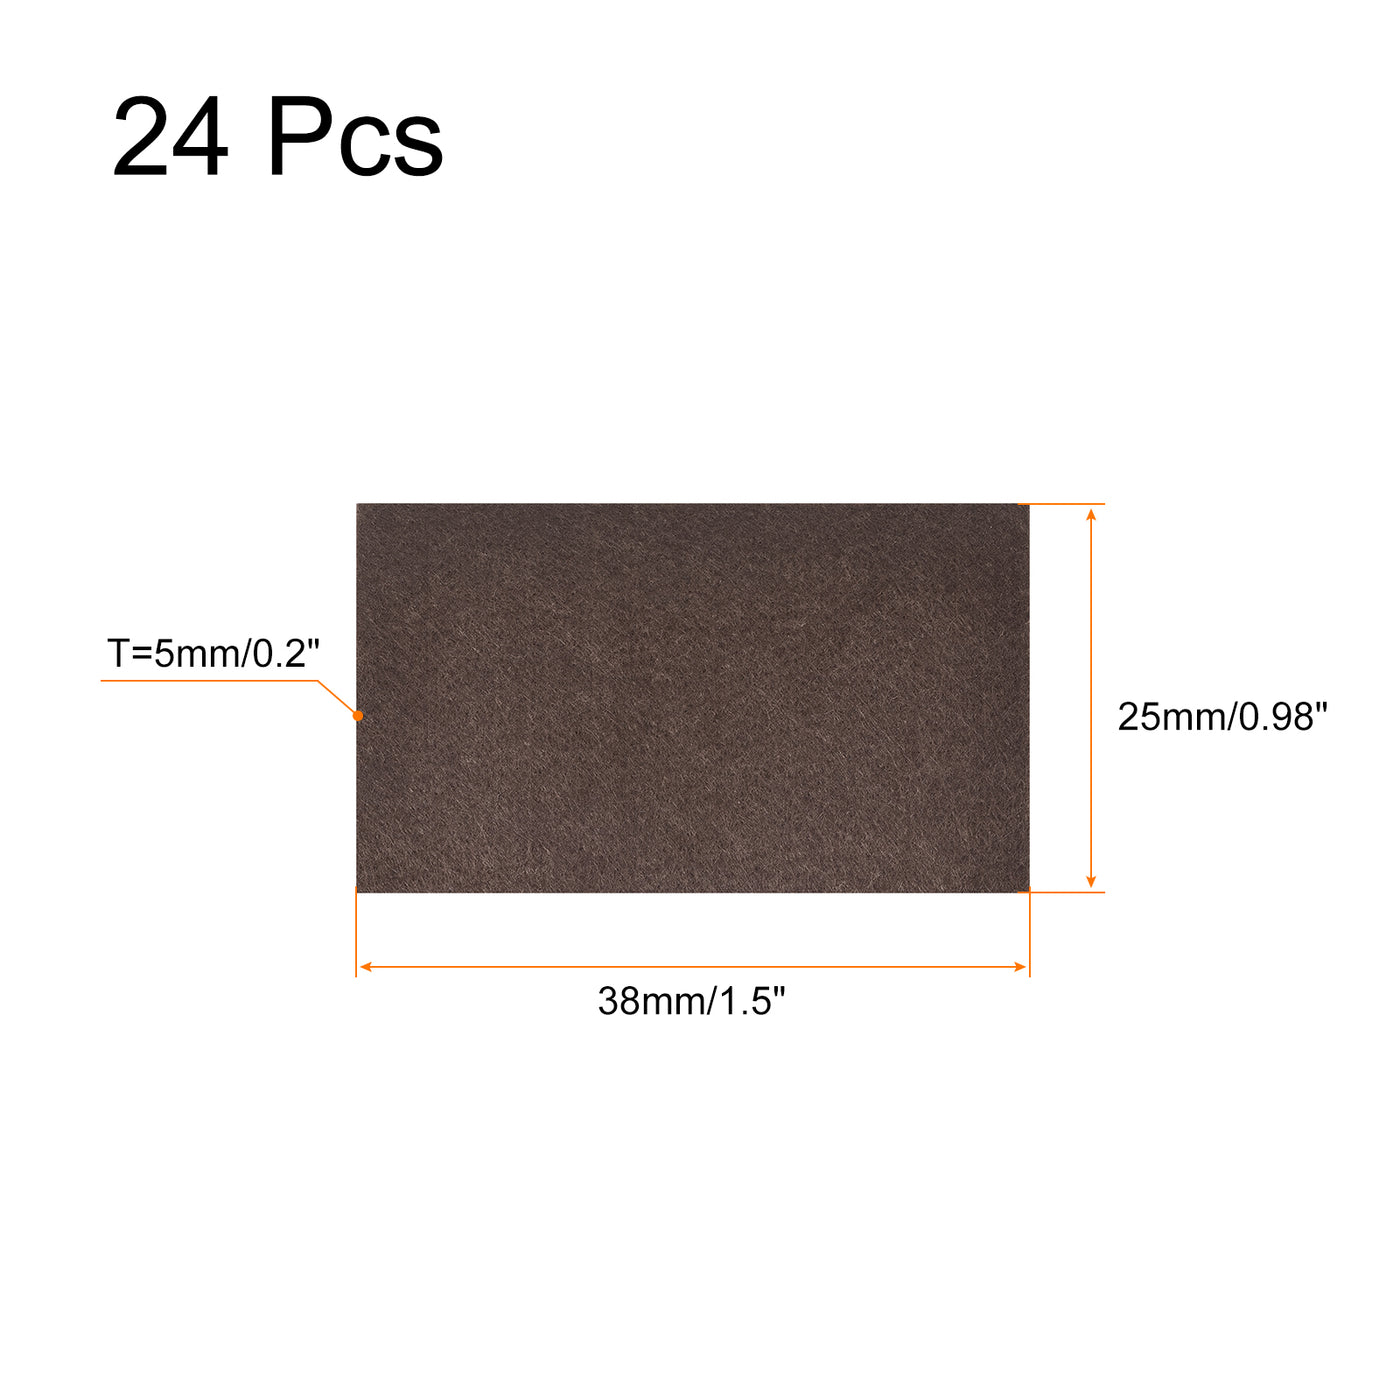 uxcell Uxcell Felt Furniture Pads, 38mm x 25mm Self Adhesive Square Floor Protectors for Furniture Legs Hardwood Floor, Brown 24Pcs